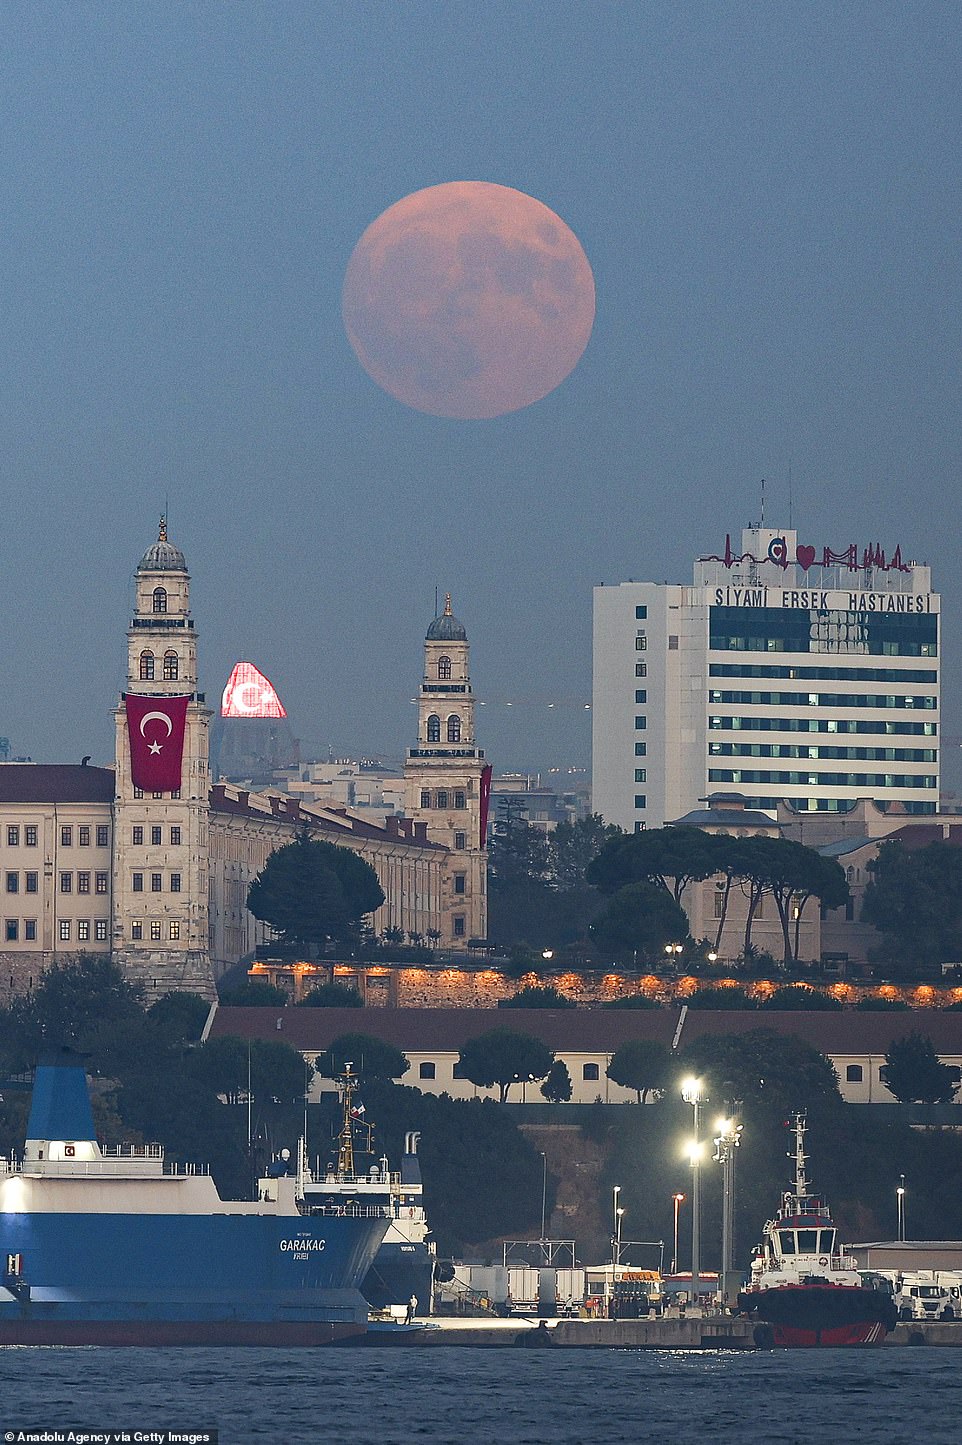 TURKEY: A view of supermoon above Selimiye Barracks and waterfront buildings in Istanbul